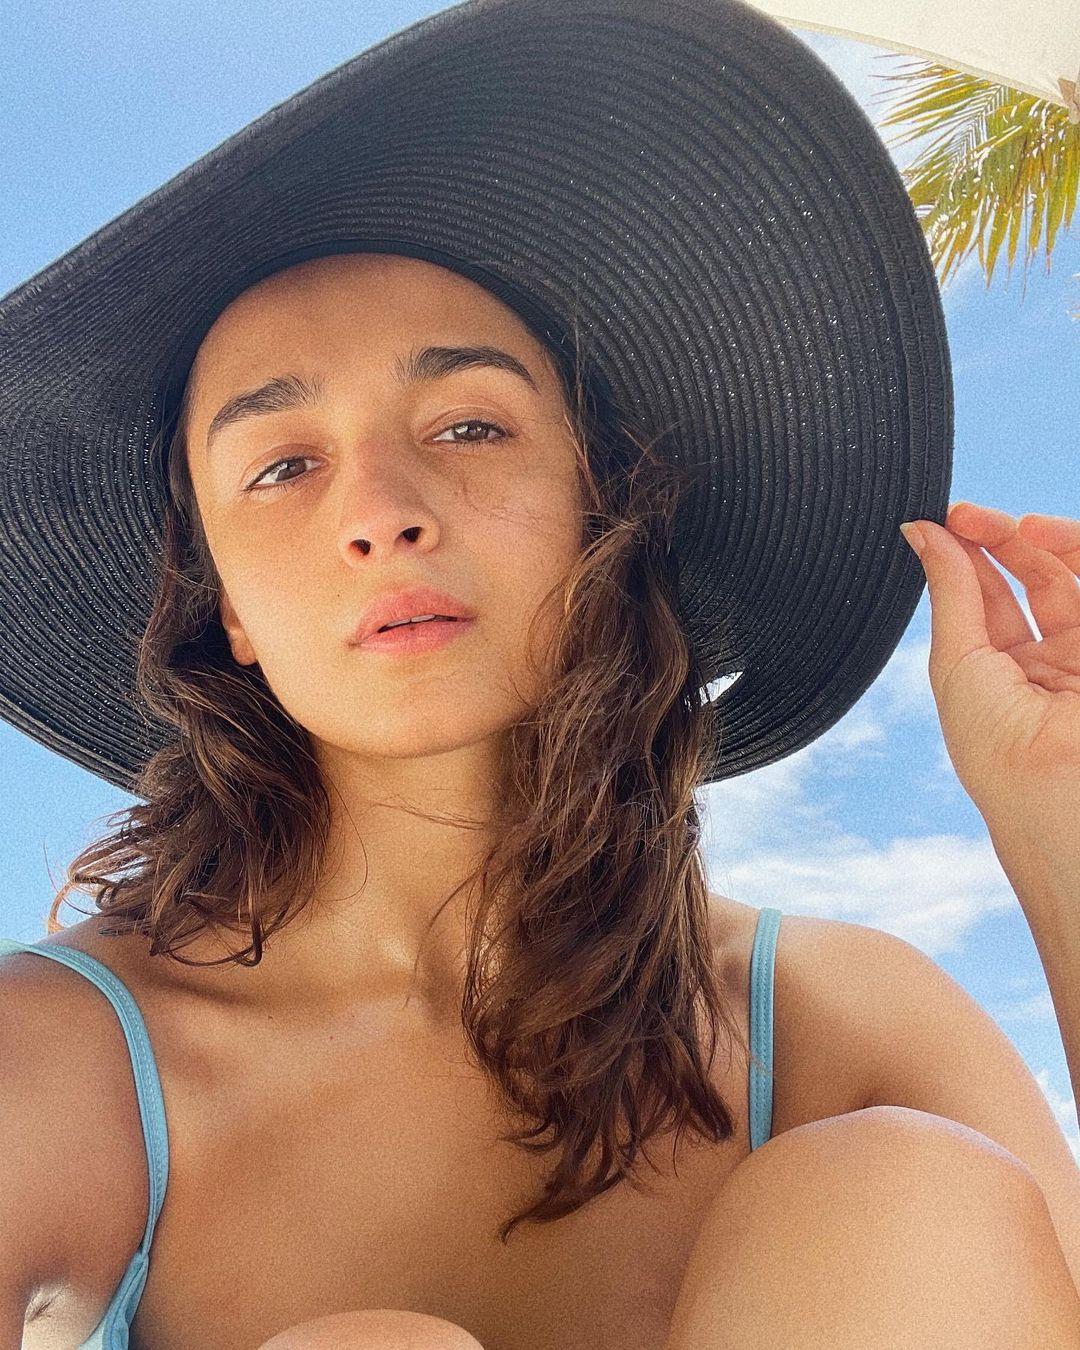 Skincare is different for everyone, but Alia Bhatt's glowing complexion proves that her routine works wonders for her.